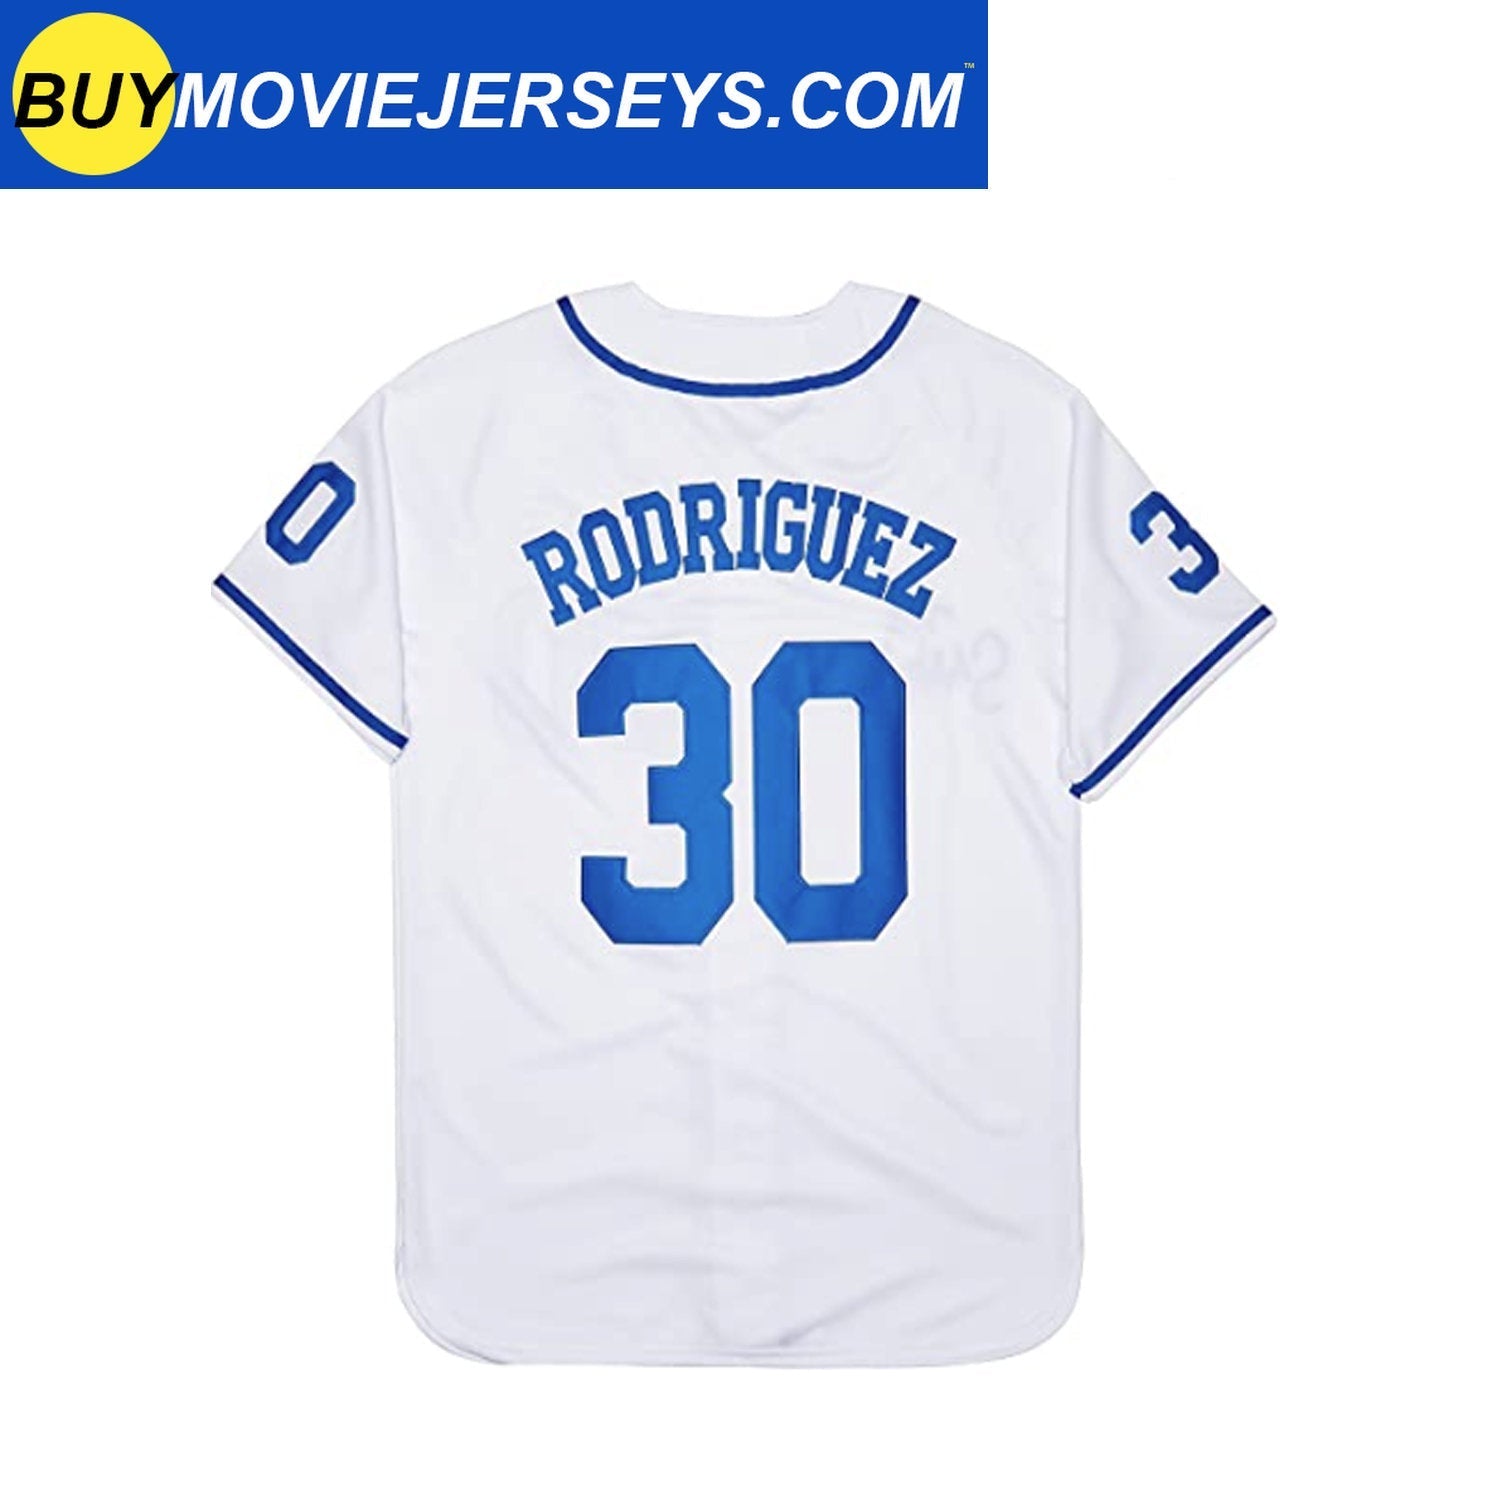 Benny The Jet Rodriguez #30 Deluxe Embroidered GRAY Baseball Jersey